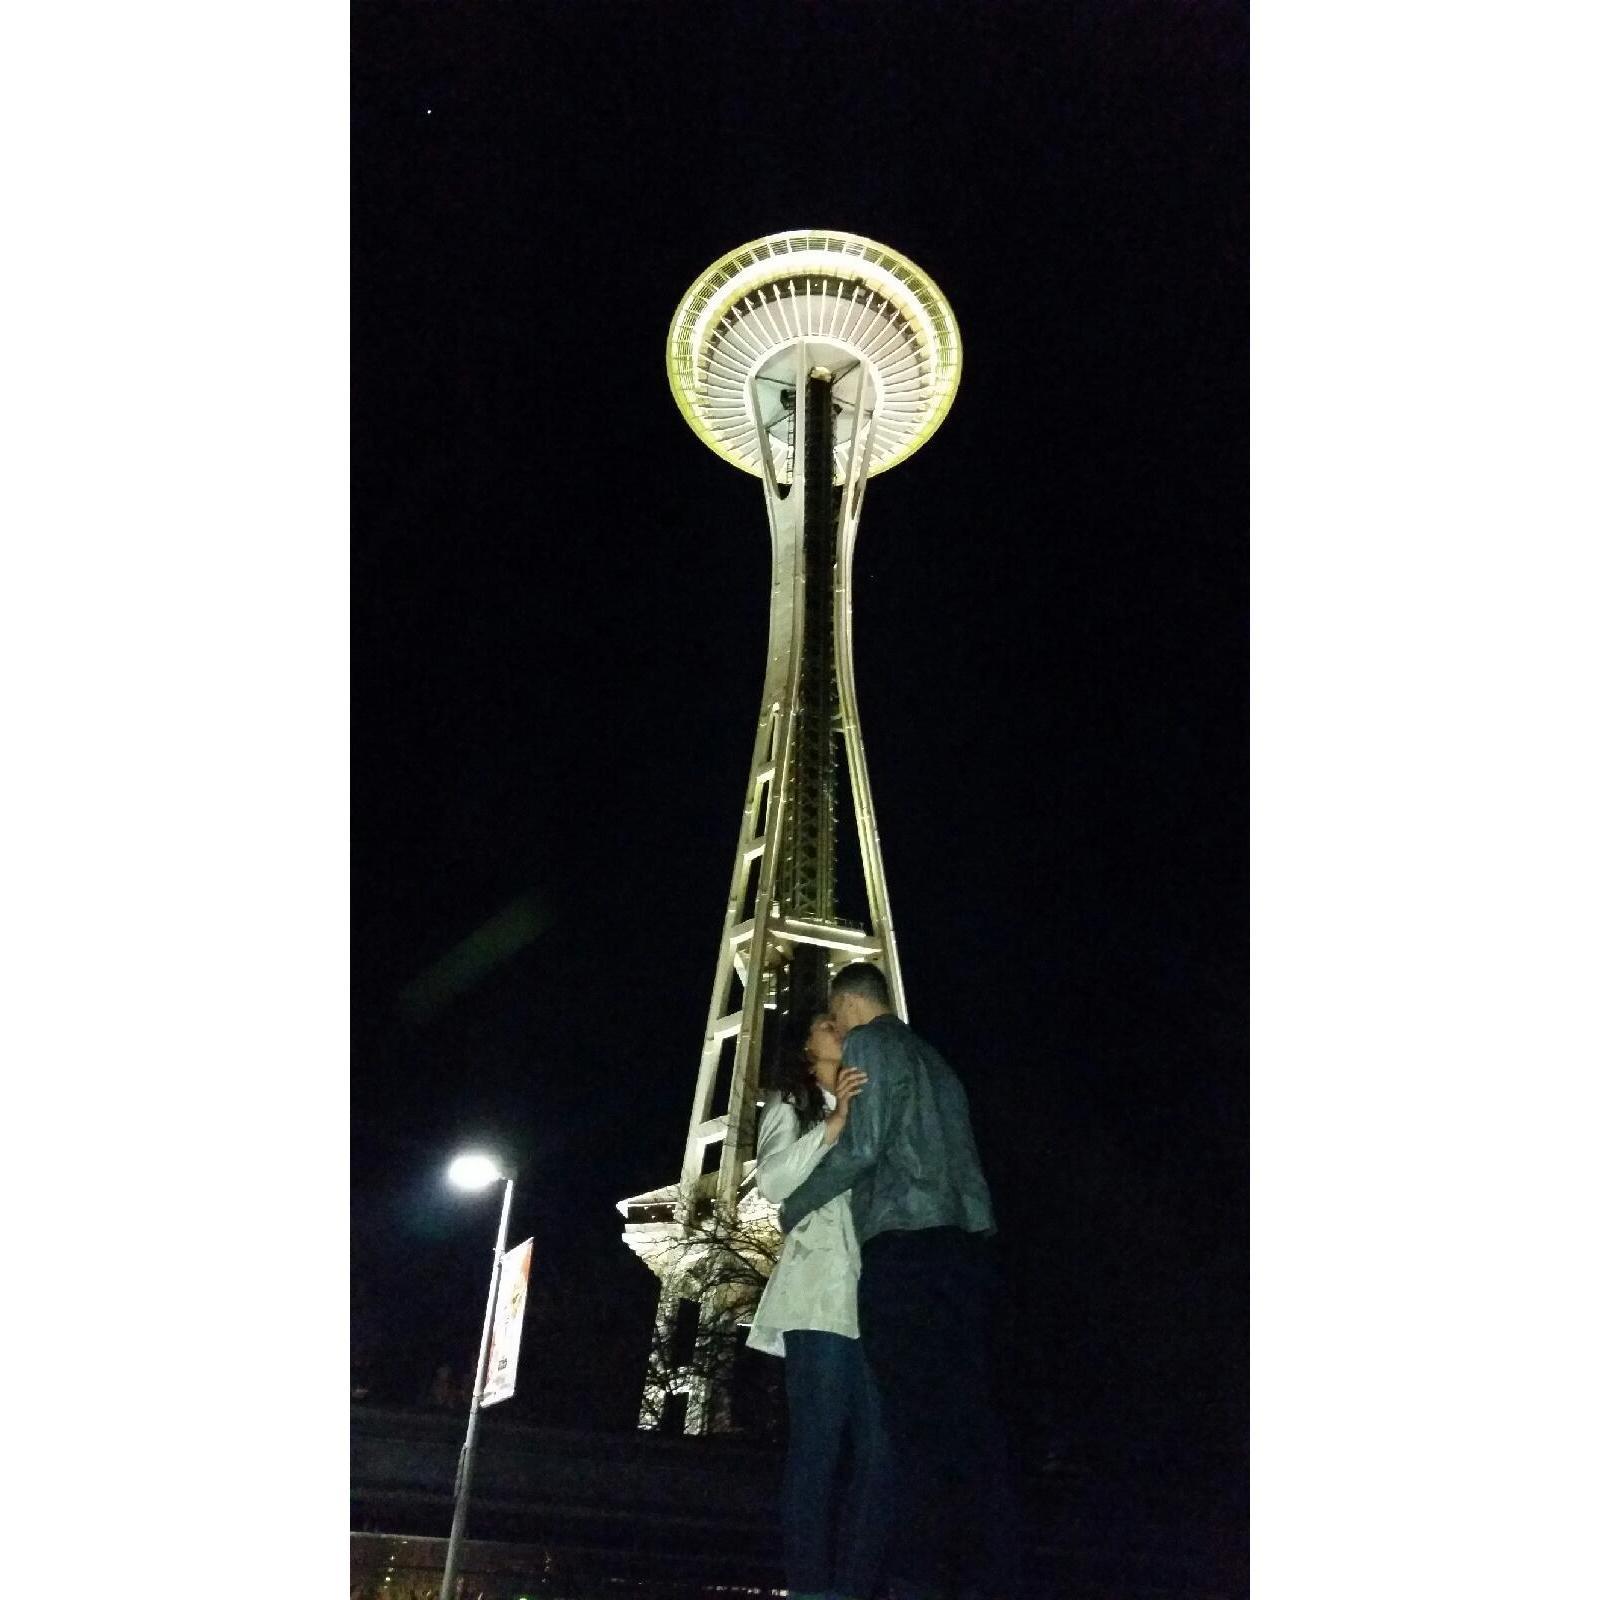 This night Nigel met Kirstyn's mom for the first time along with her family friend Mrs. Patty. The four had a lovely dinner at the Space Needle and this picture was captured right after.